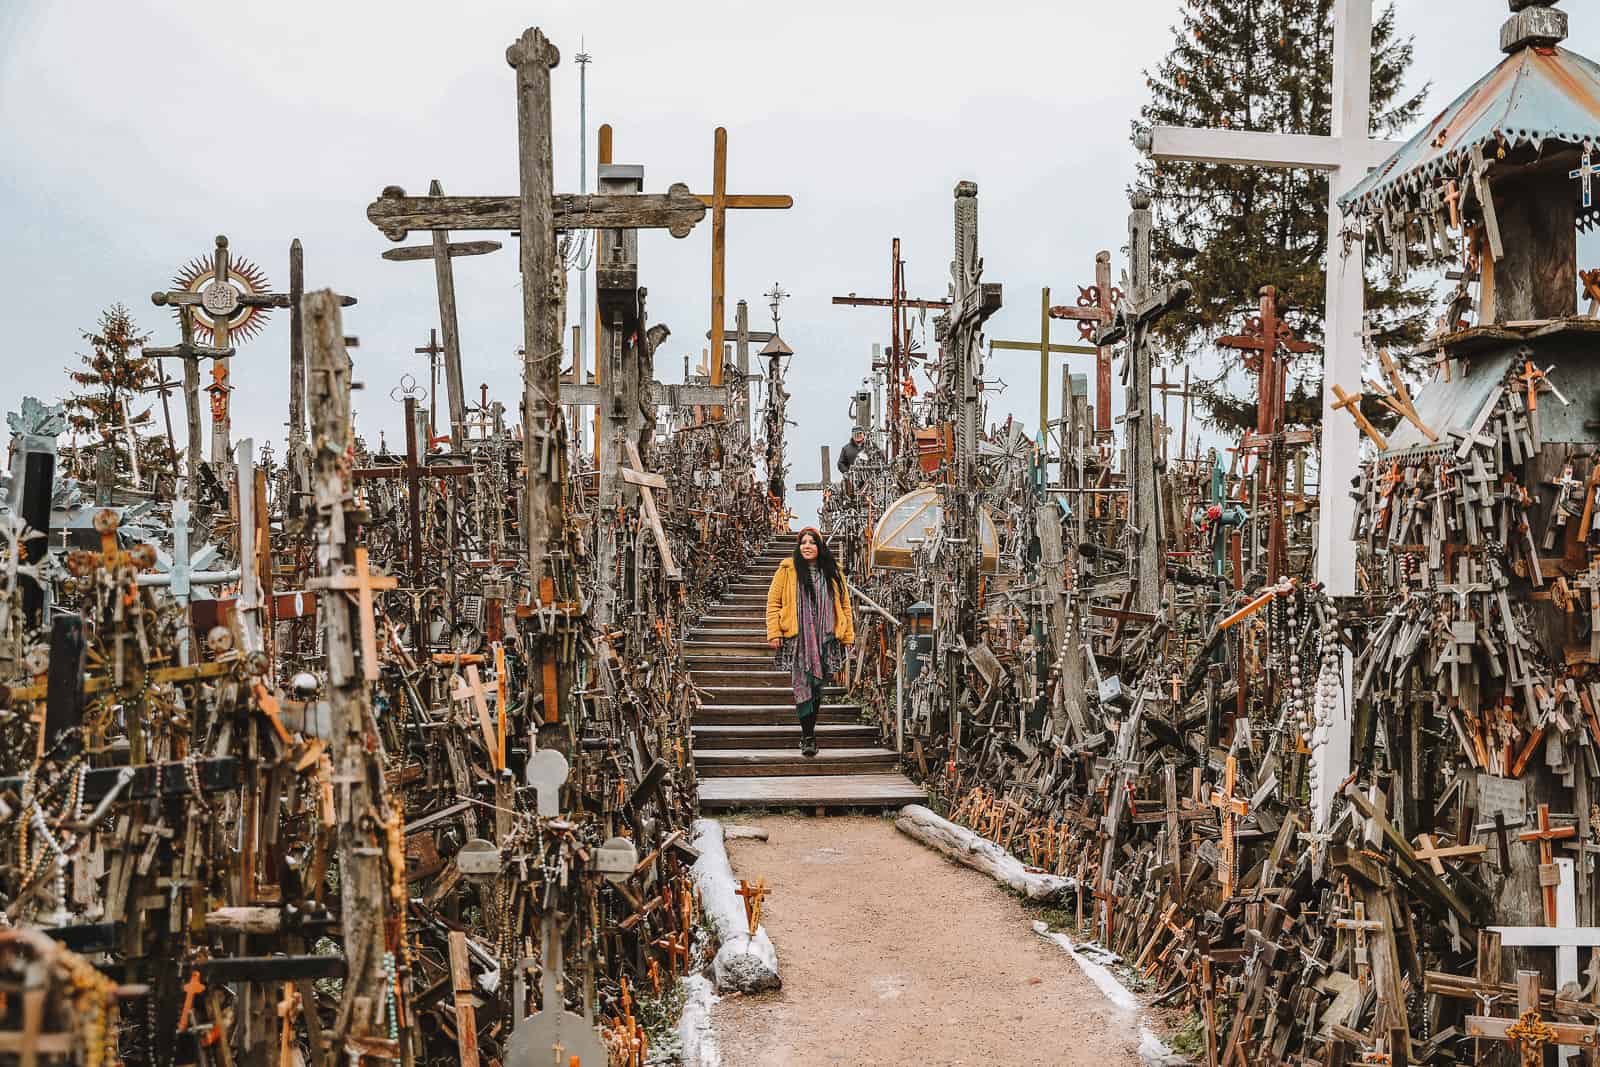 How to get to the Hill of Crosses from Vilnius Lithuania